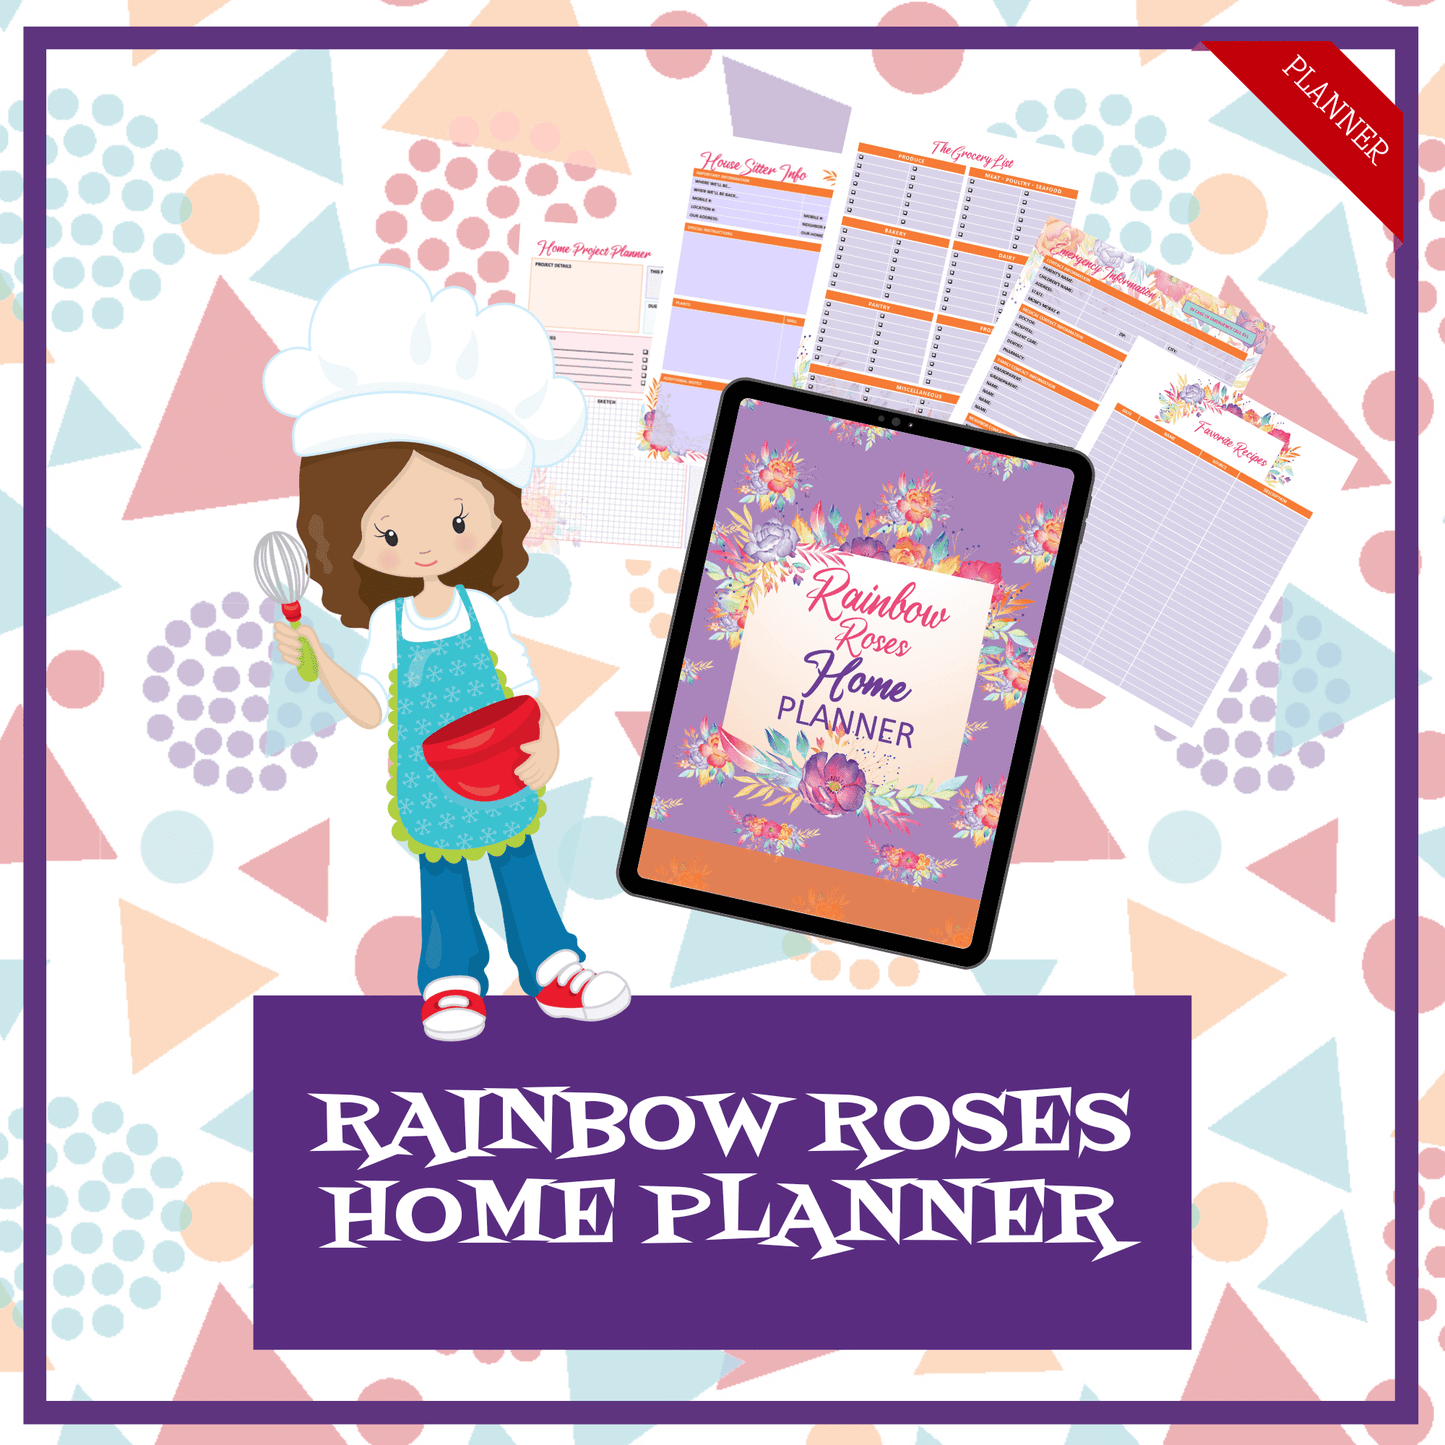 Rainbow Roses Home Planner